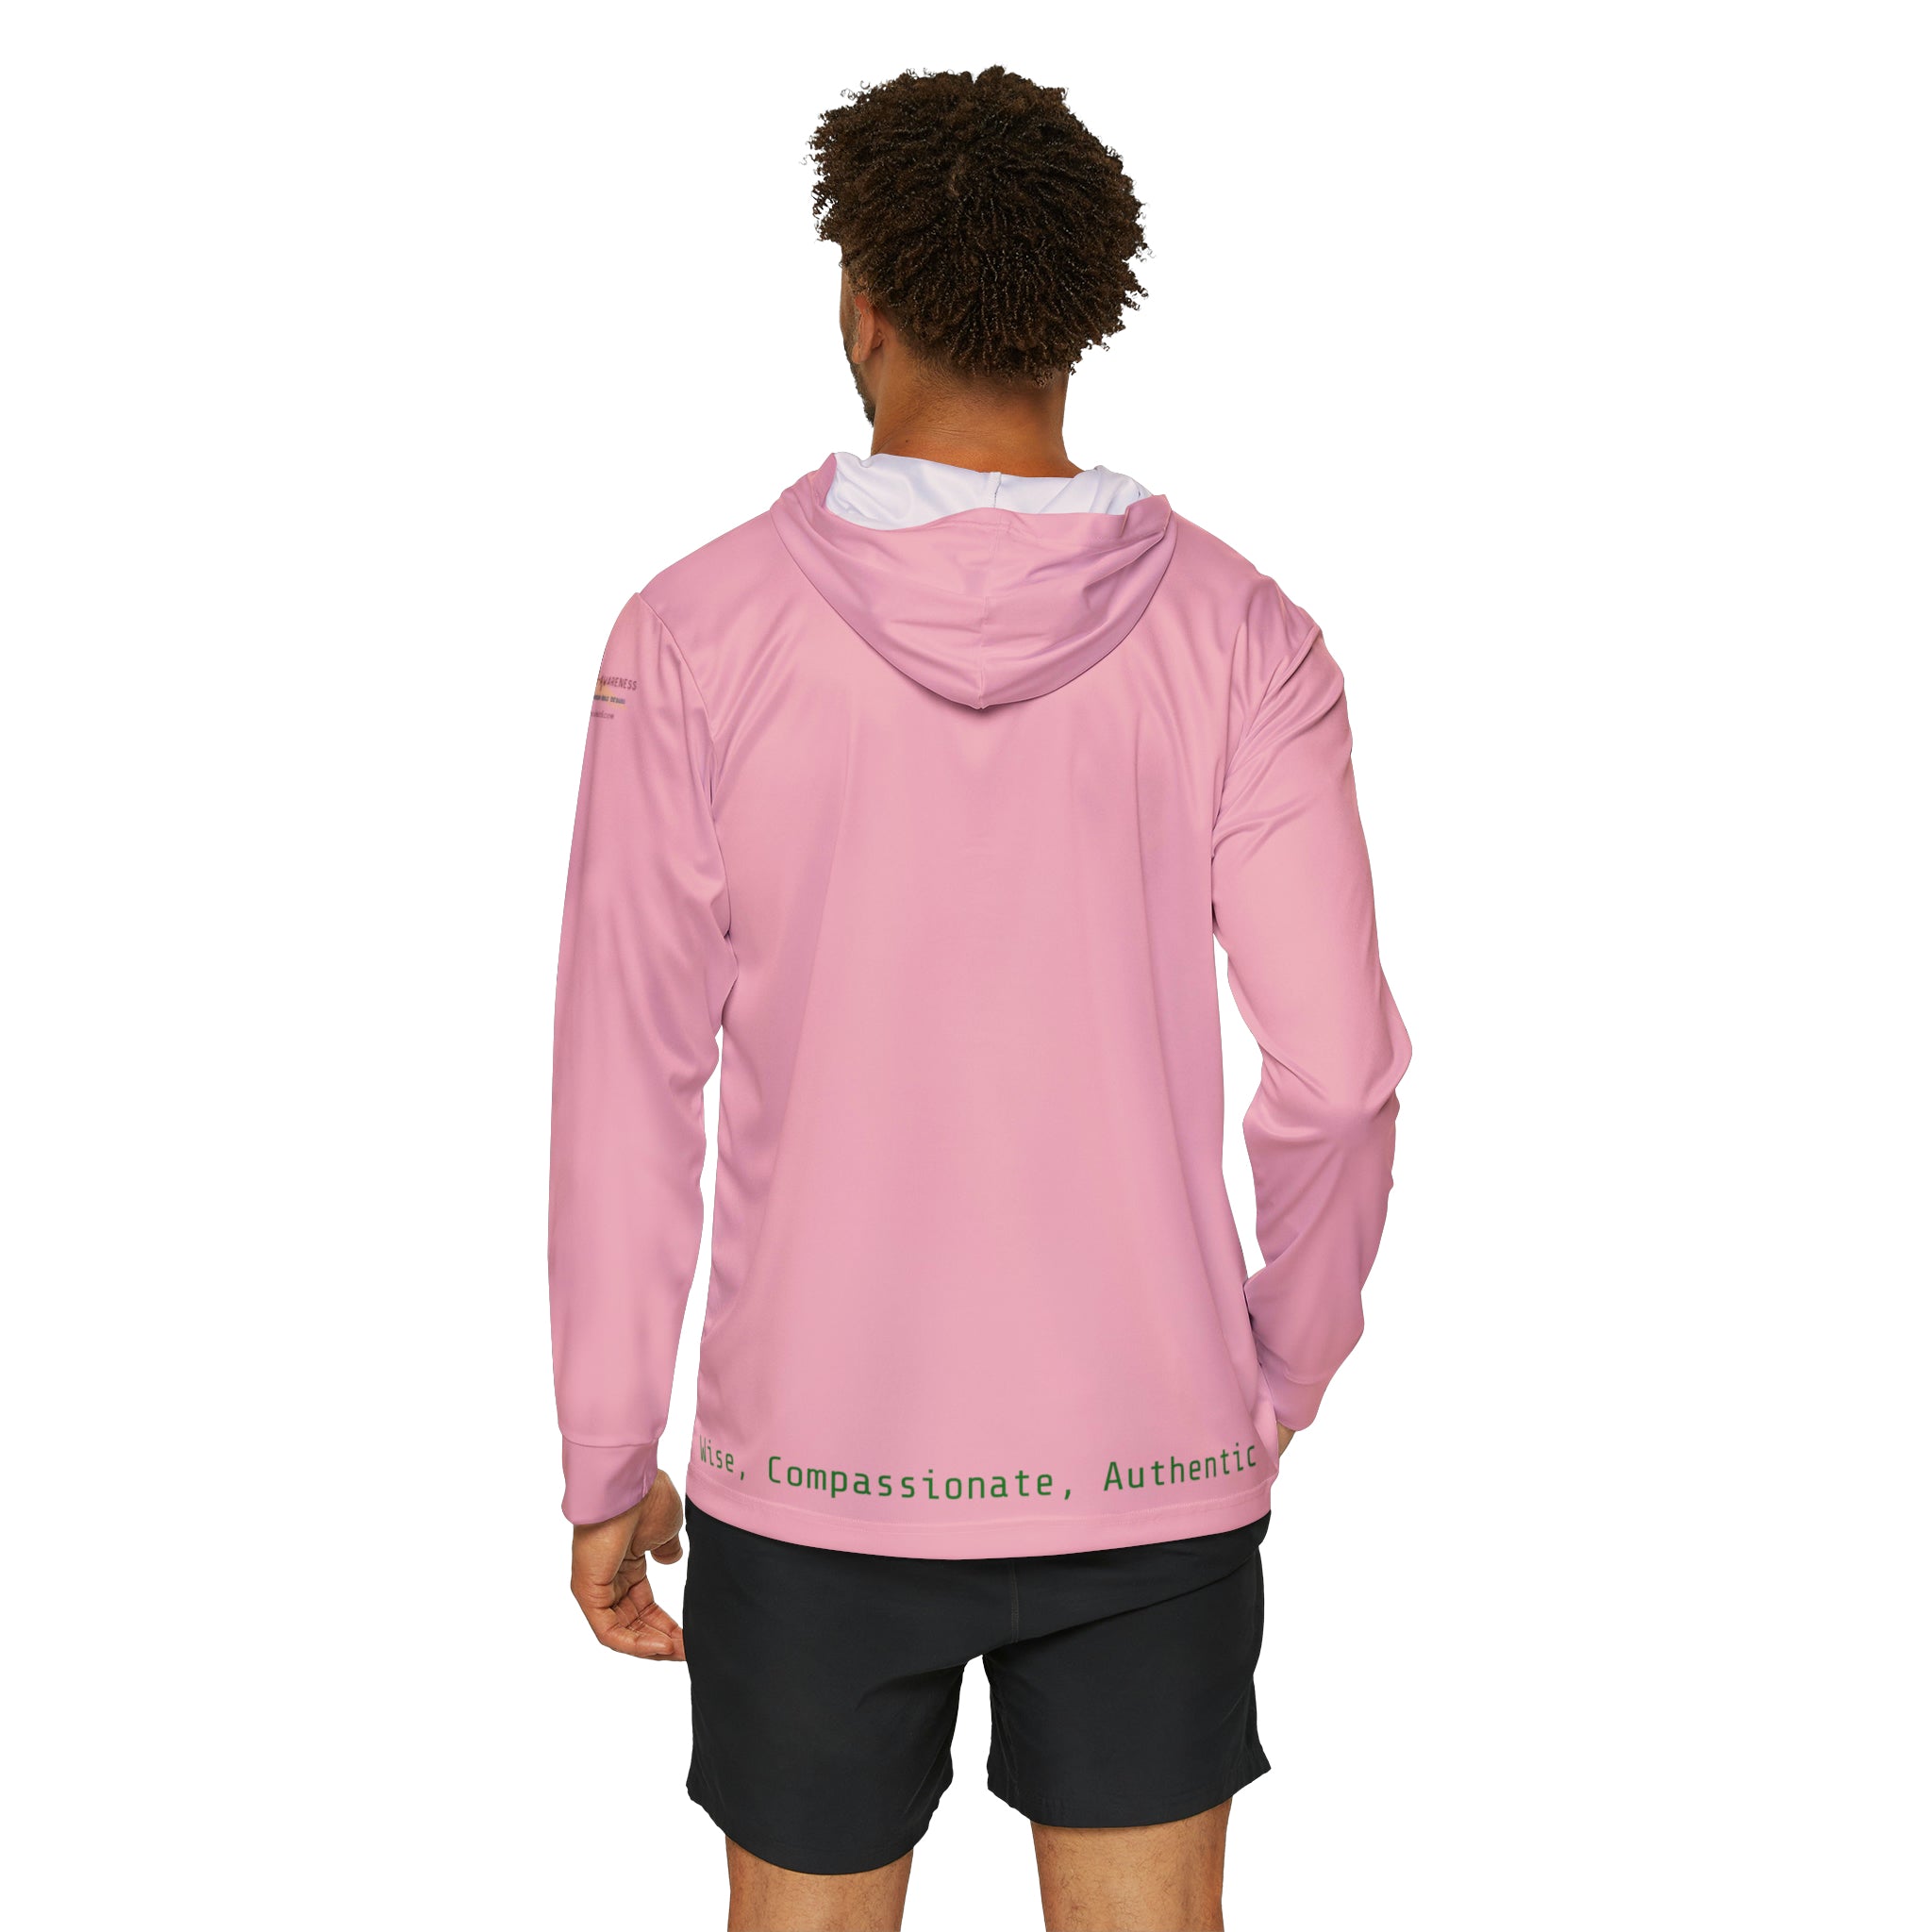 Strong Men's Warmup Hoodie: Unleash Your Strength Activewear Durable Fabric Made in USA Men's Hoodie Mental Health Support Moisture-wicking Performance Apparel Quality Control Sports Warmup UPF 50+ All Over Prints 6075557278795010211_2048 Printify